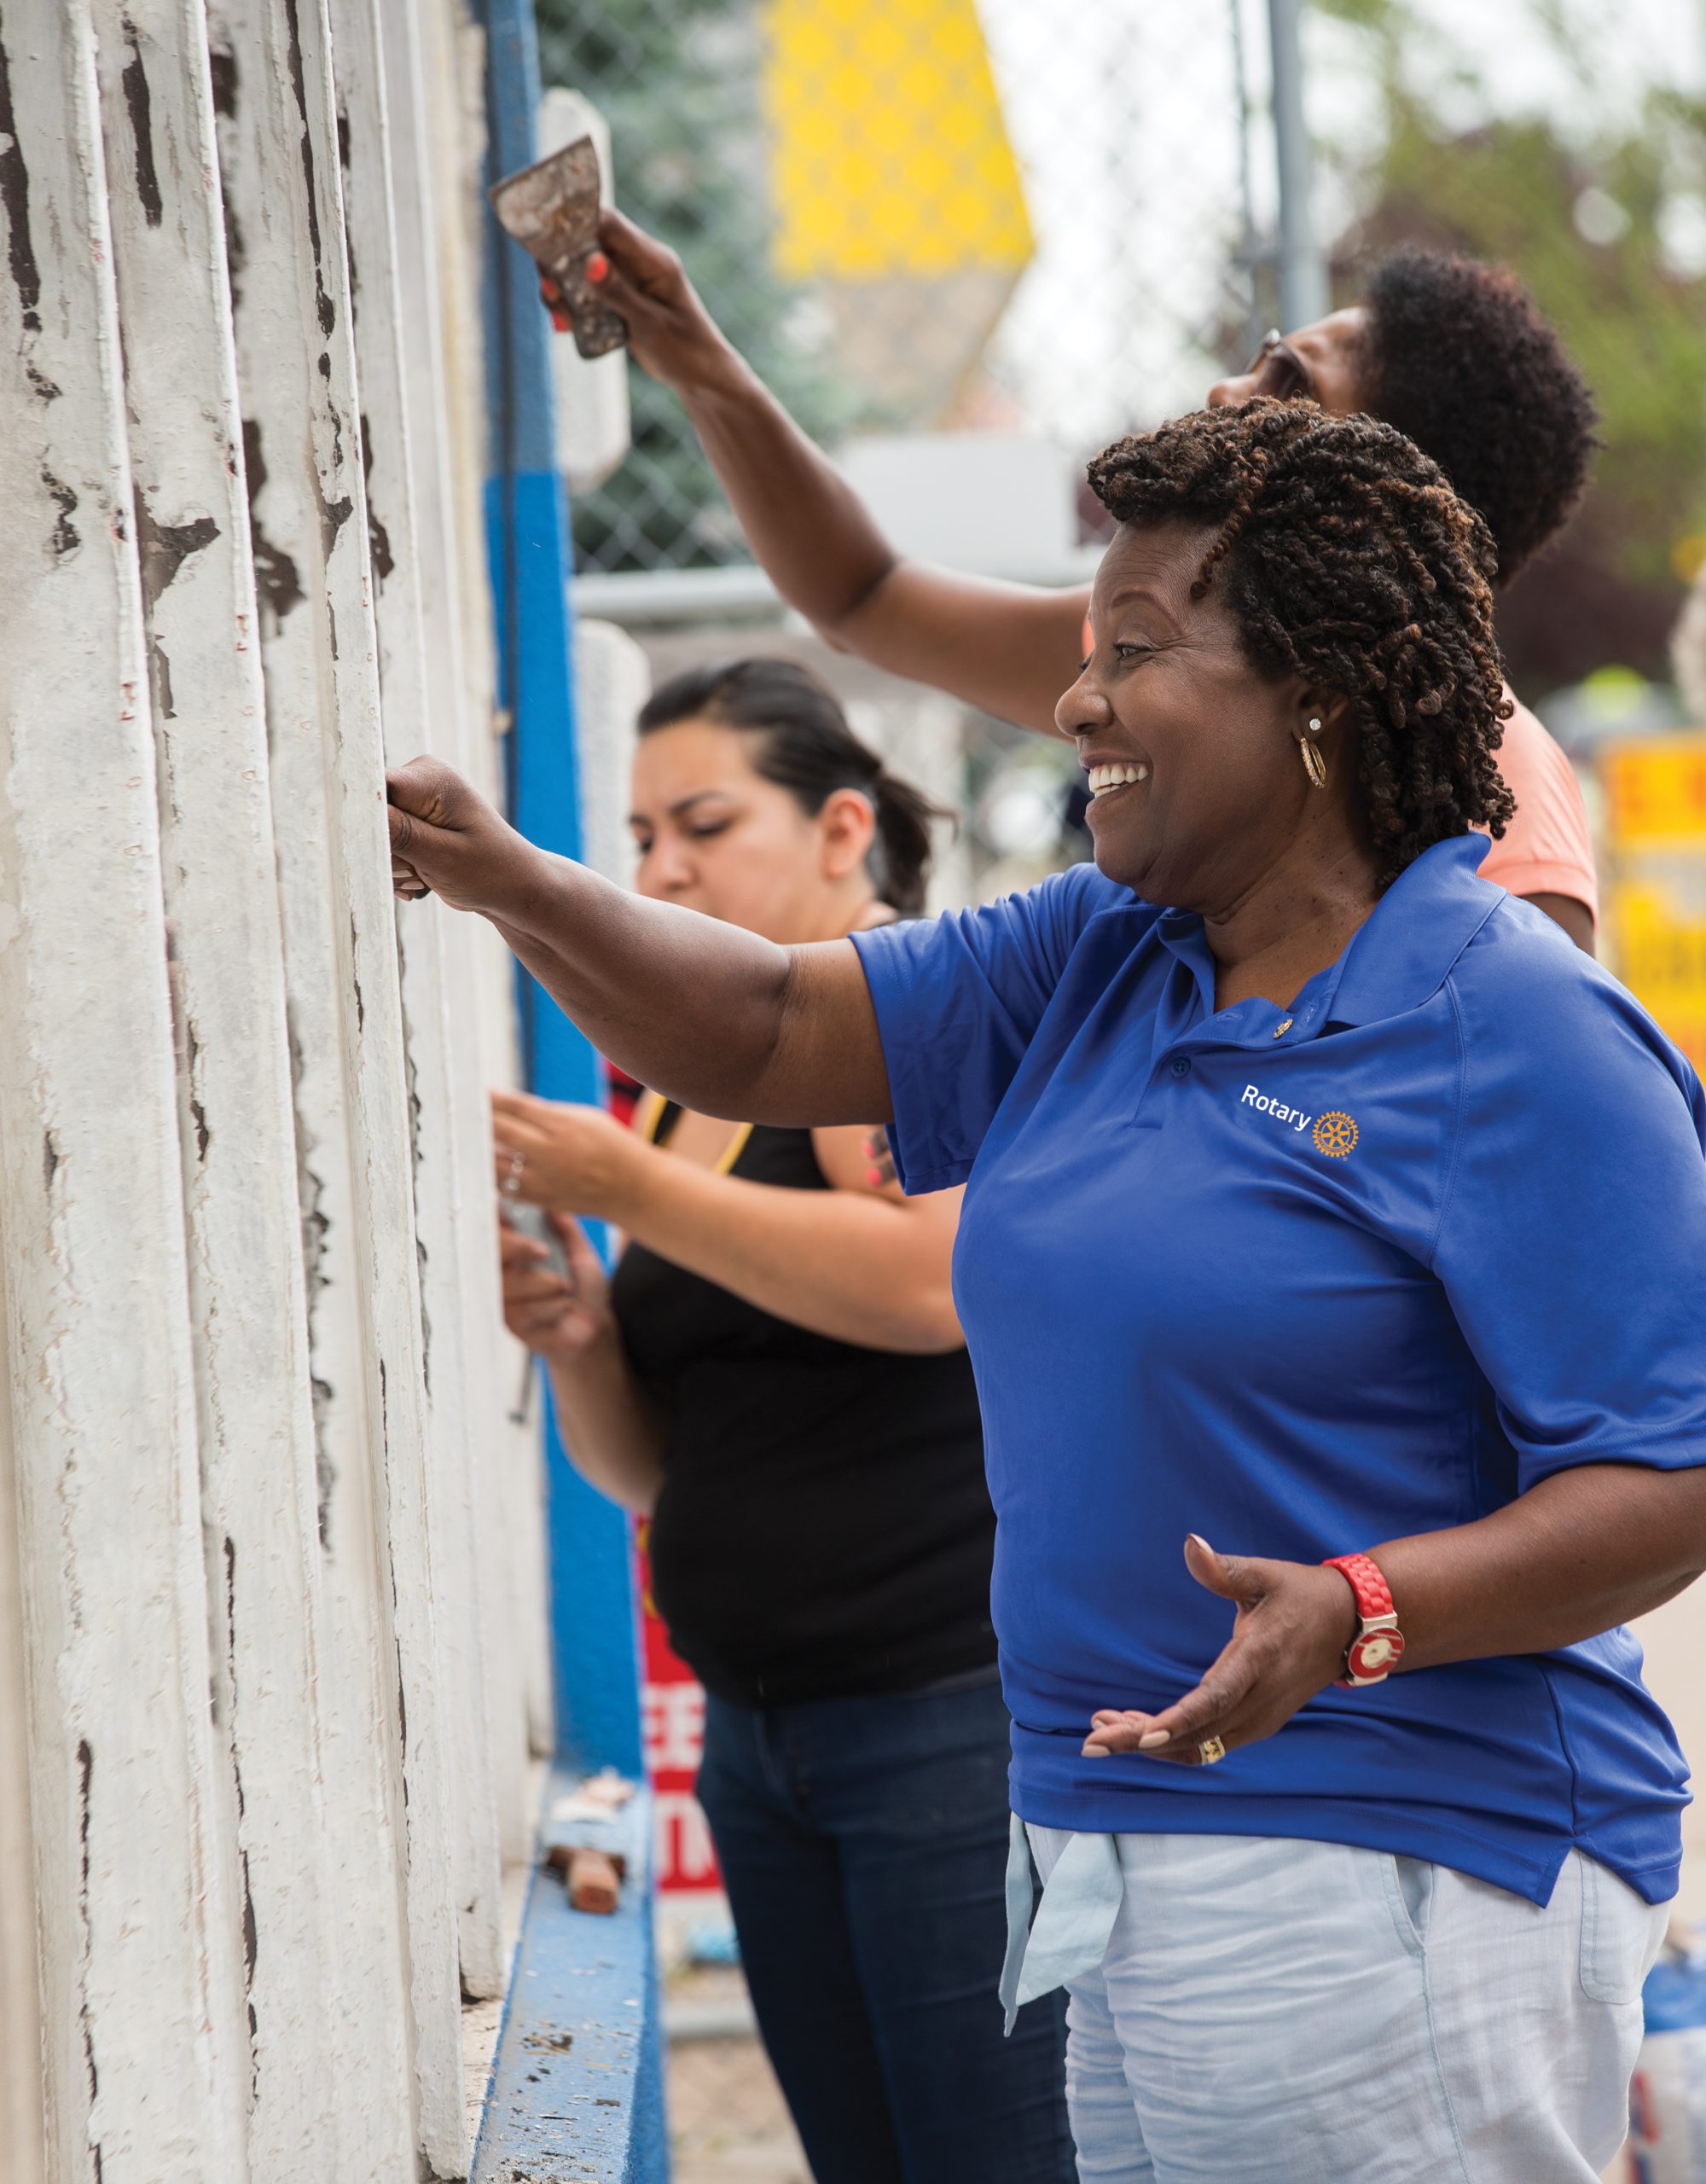 Mary Ferris (right), of the Rotary Club of Detroit, scrapes paint from the facade of Irma Fuentes' hardware store in Detroit, Michigan, USA, 25 July 2014.